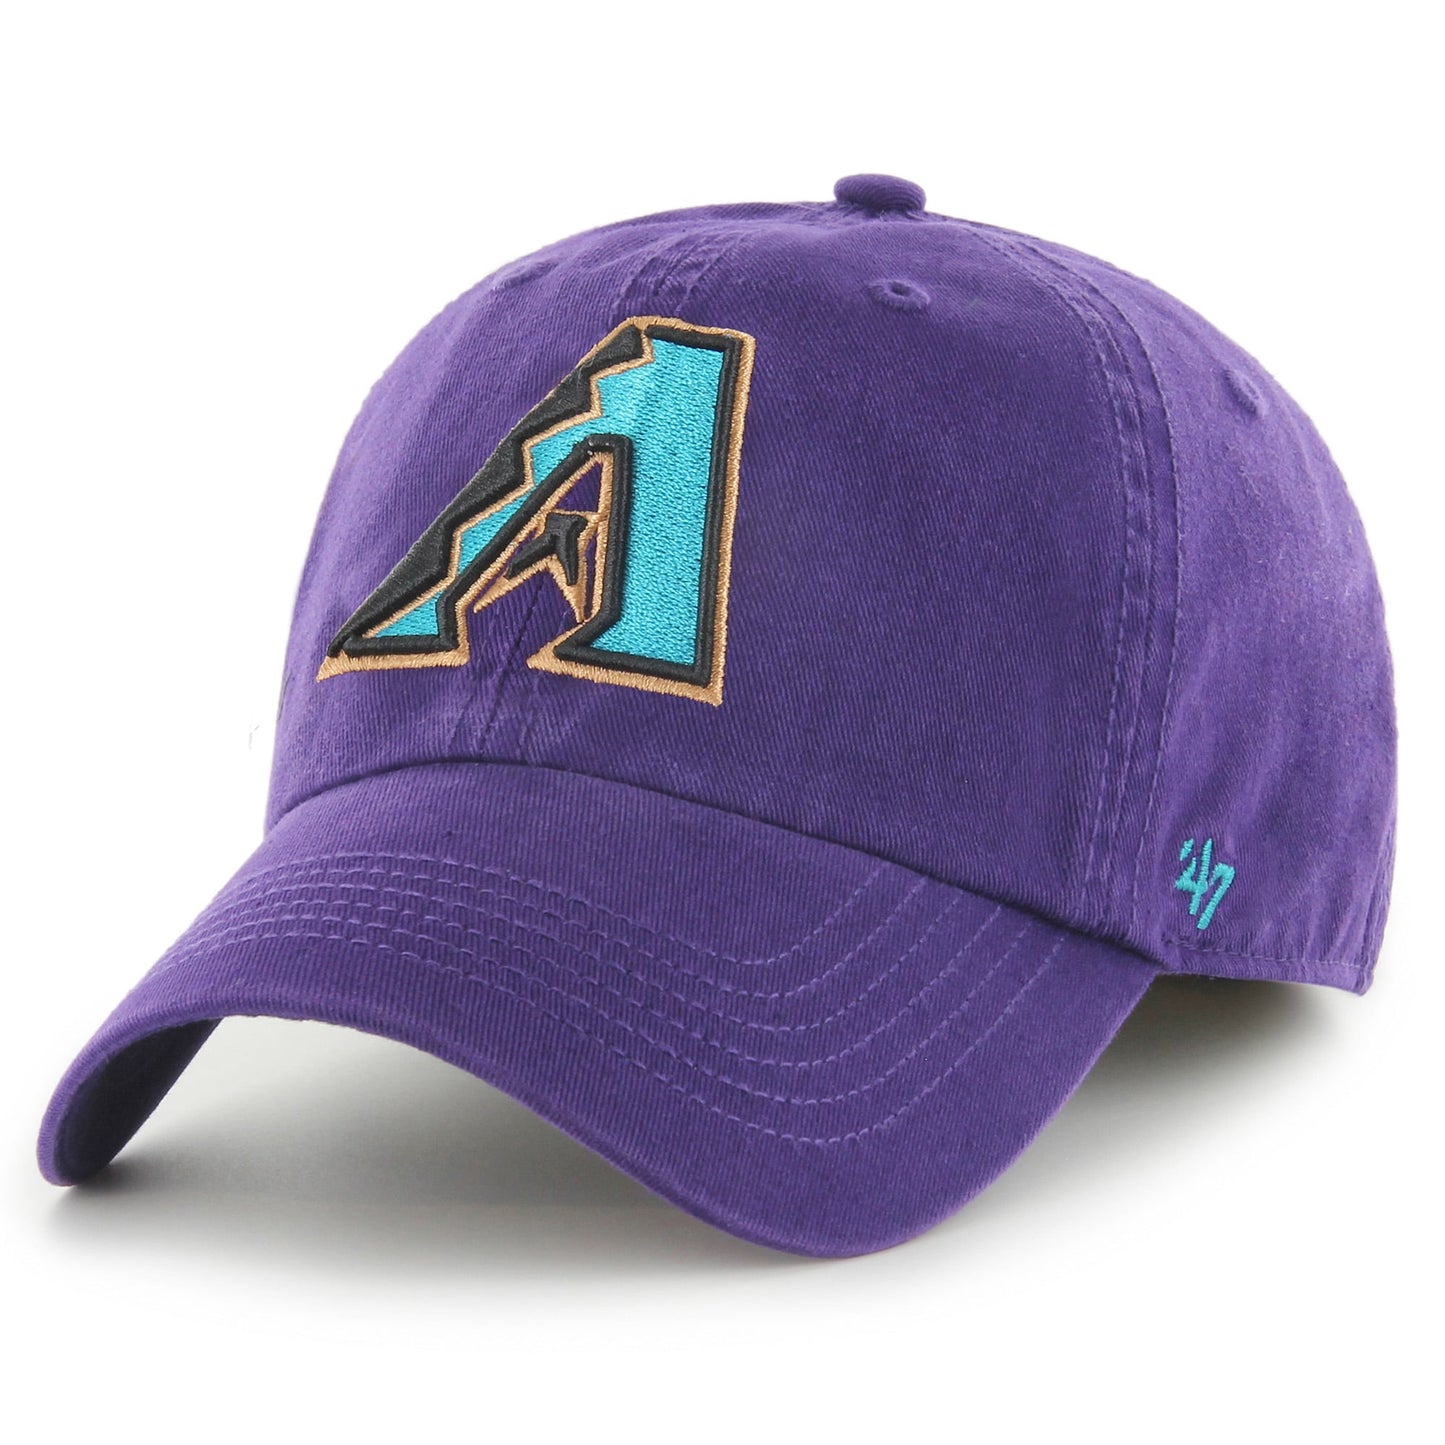 Arizona Diamondbacks '47 Cooperstown Collection Franchise Fitted Hat - Purple